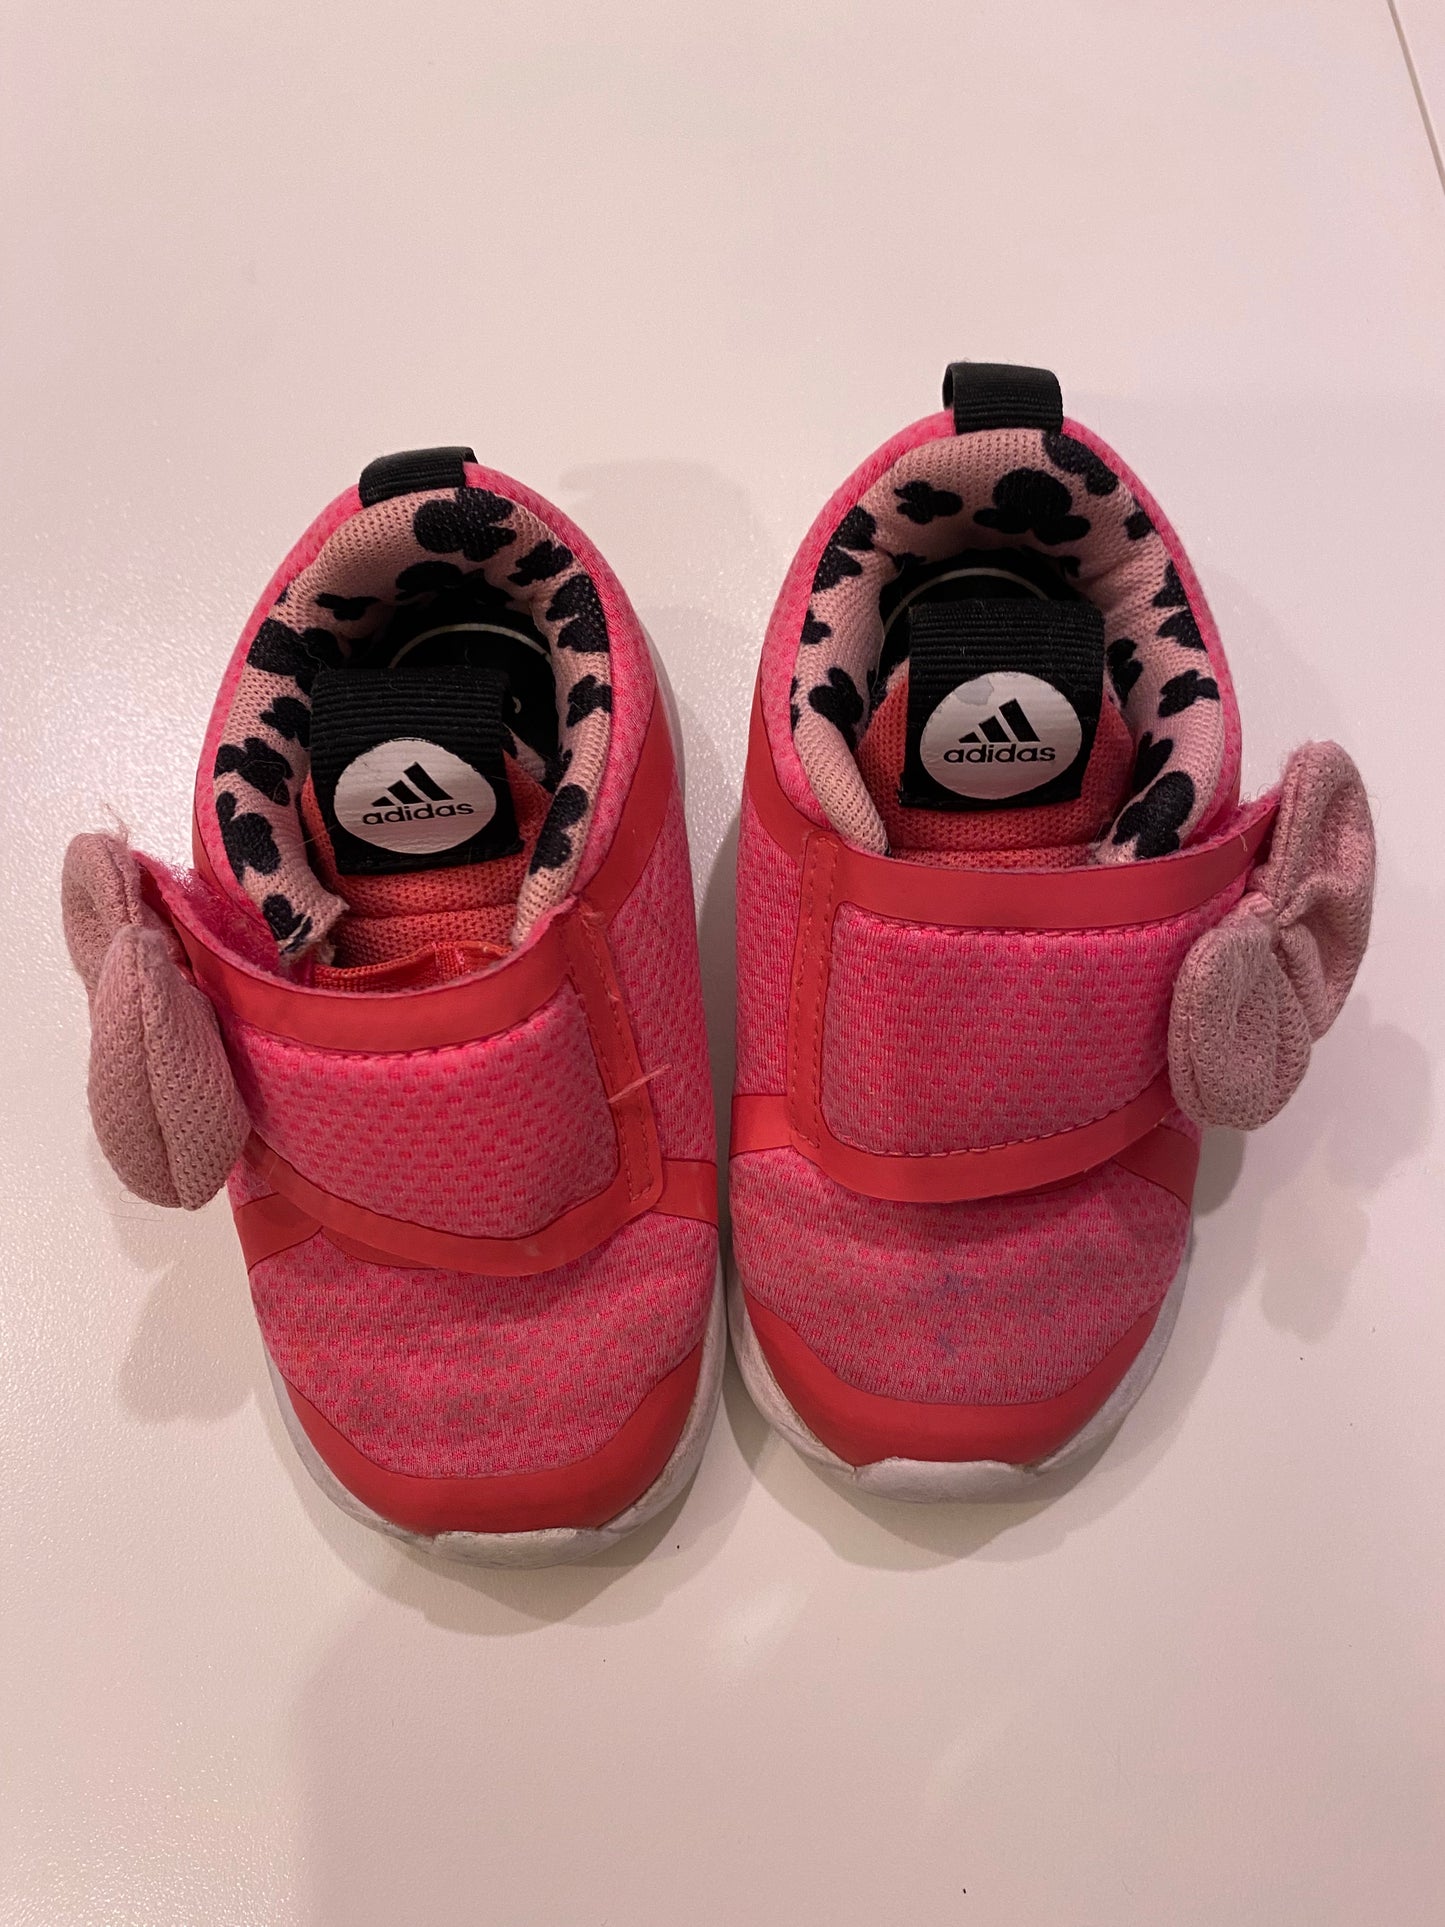 Adidas Hot Pink Minnie Mouse w/ Bow Detail Girls Size 6